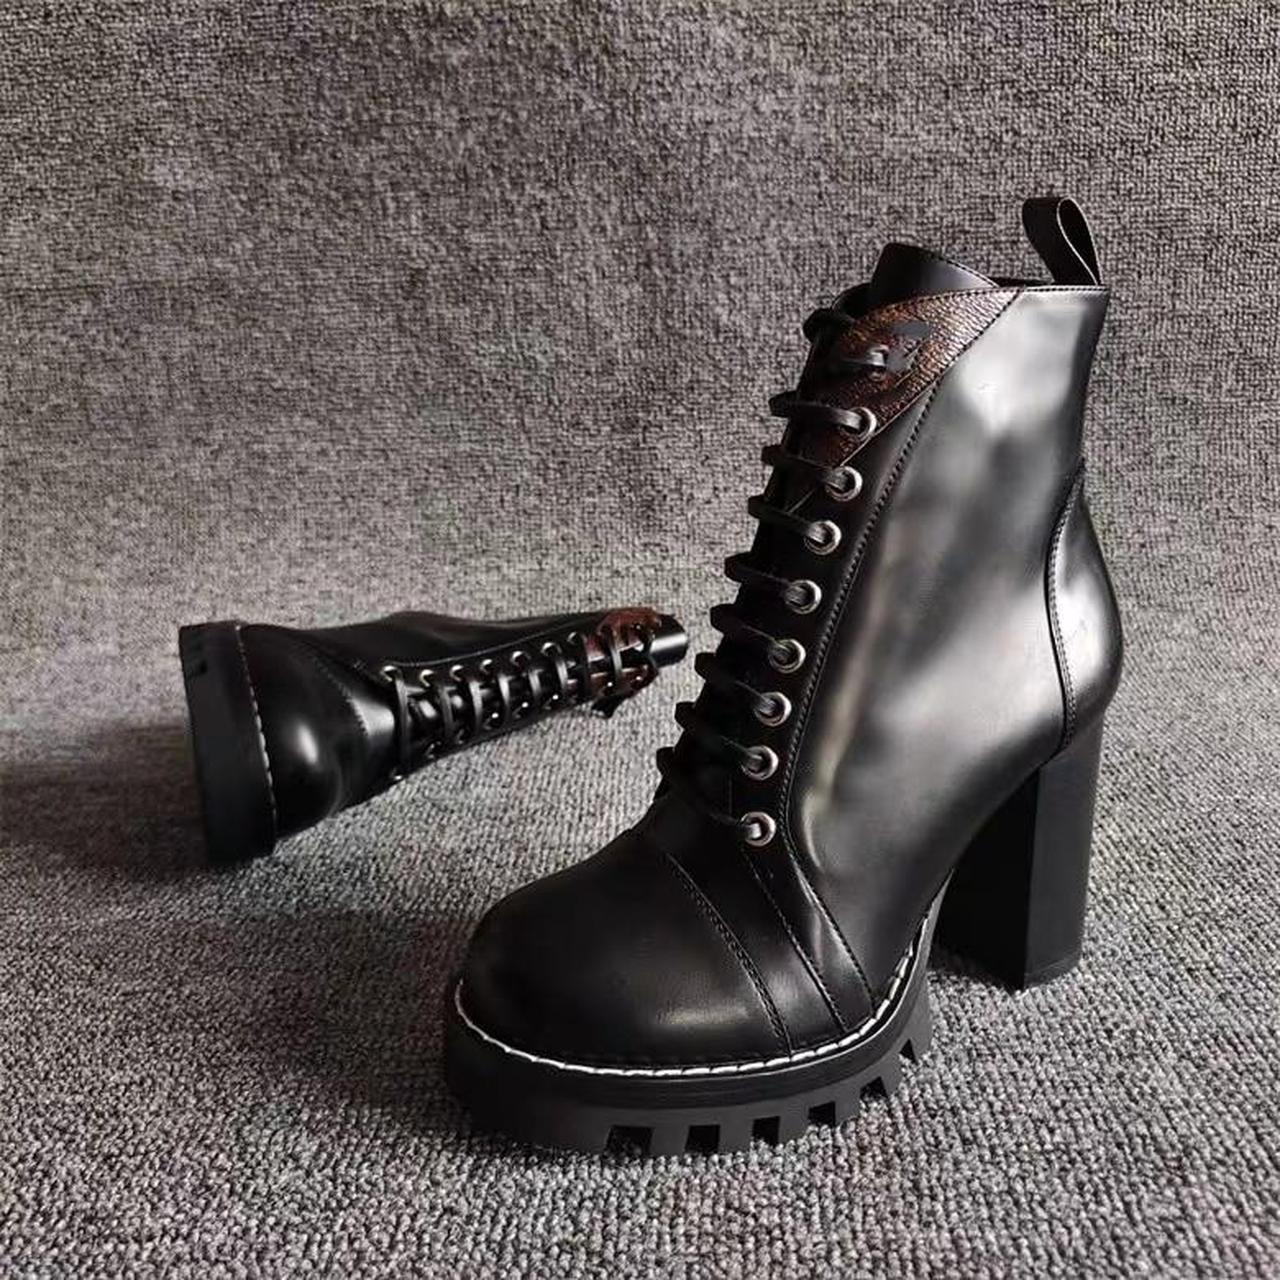 Real Leather Women's Anckle Boots Round Toe Chunky... - Depop